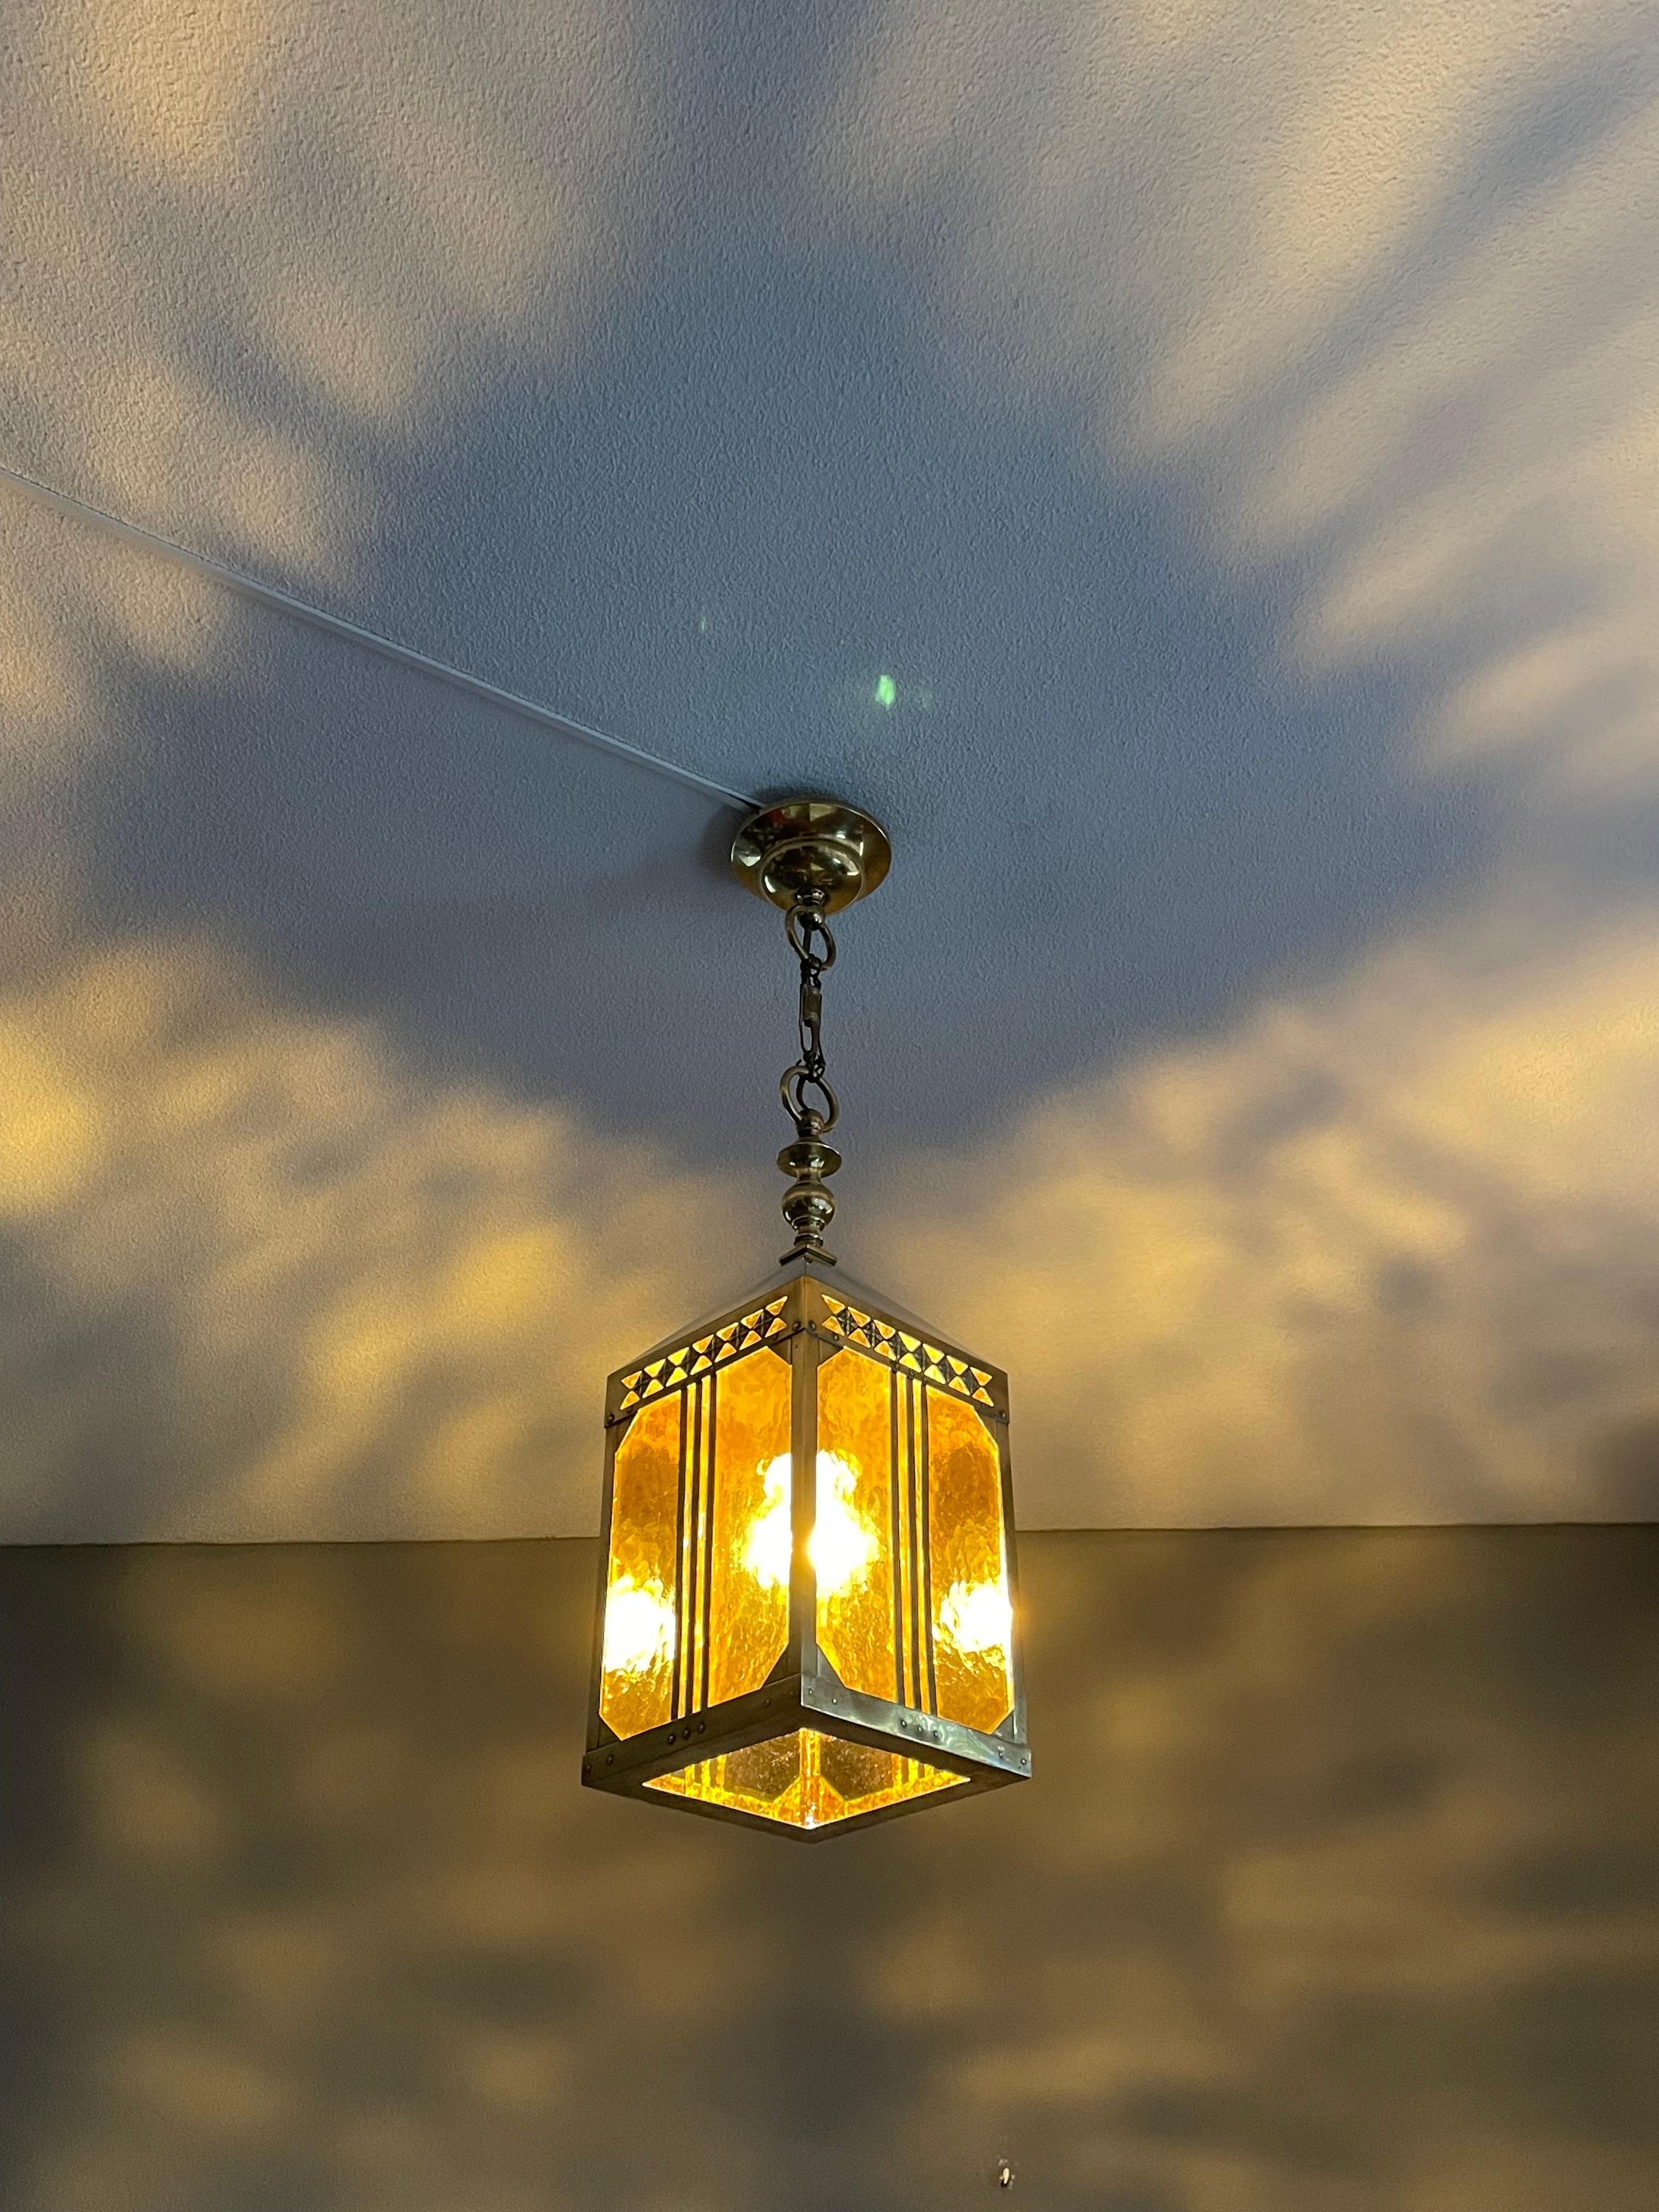 Unique, truly stylish and all-handcrafted Dutch Arts & Crafts entry hall pendant light / lantern.

If you are looking for the best and the rarest when it comes to European Arts and Crafts antiques then this extremely rare hallway or entry hall